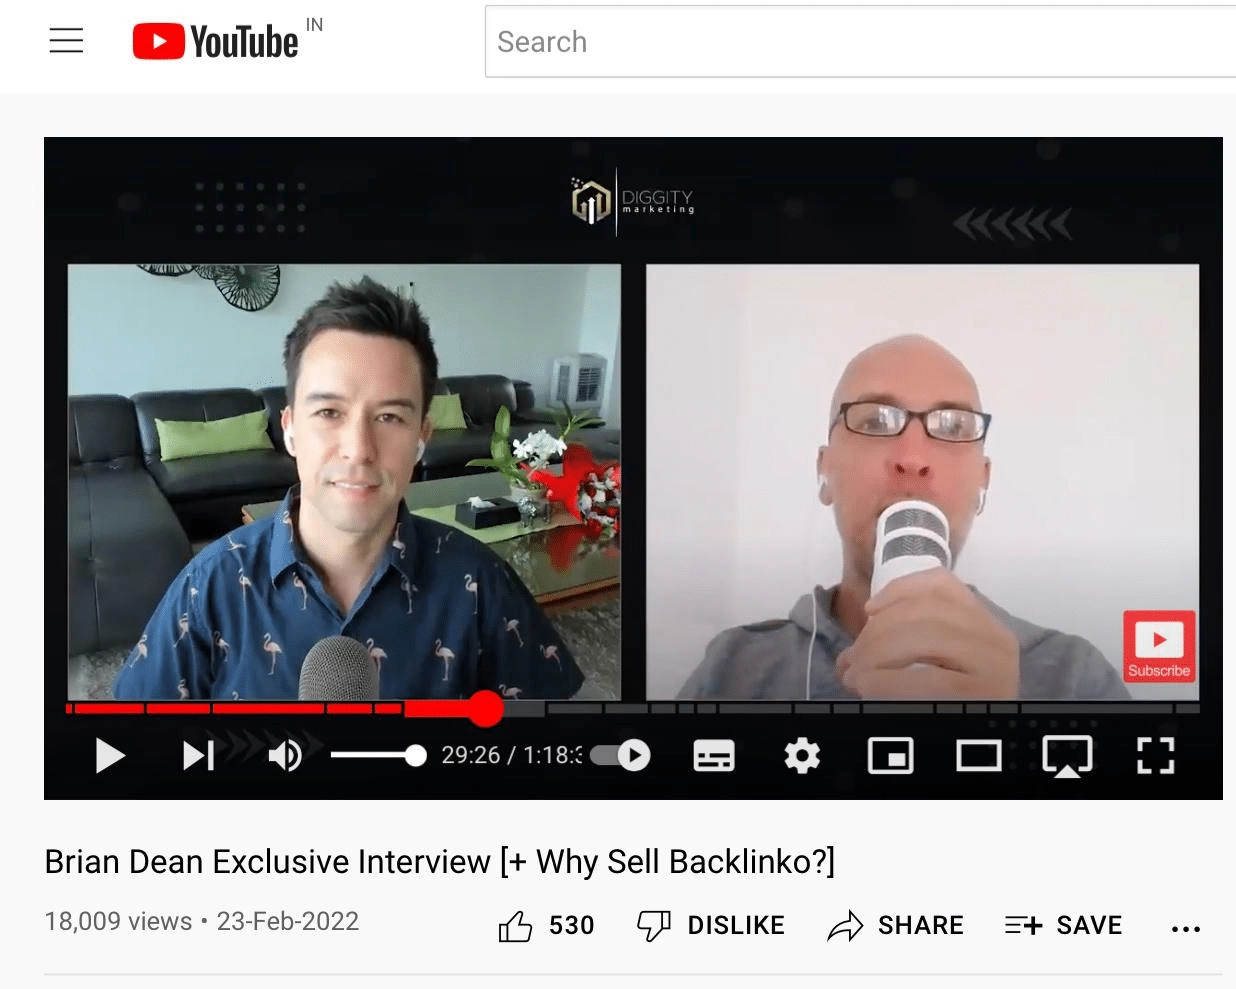  Youtube interview of Brian Dean from Backlinko and Matt Diggity